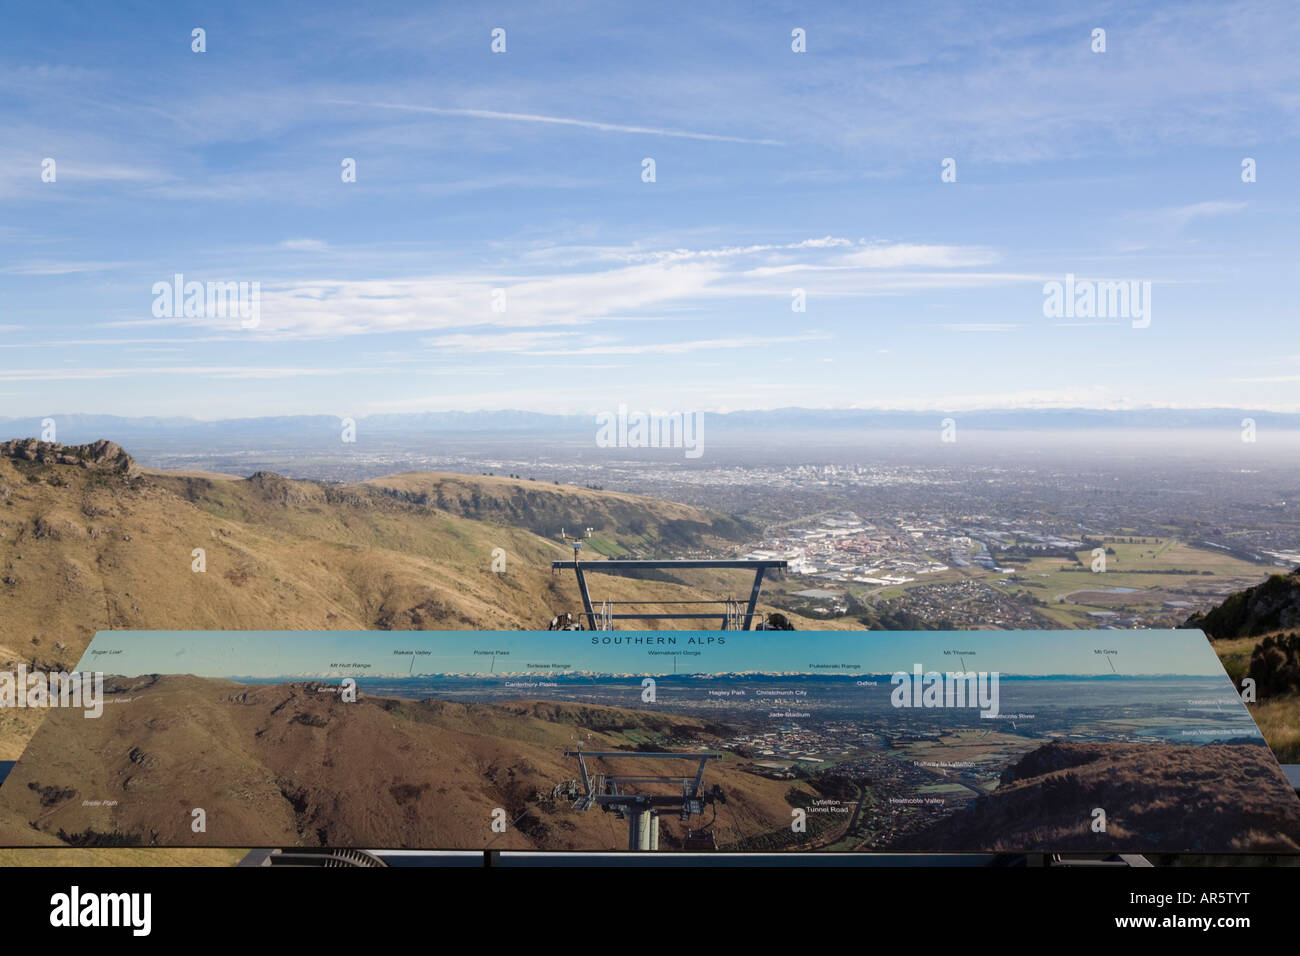 View from Mount Cavendish Gondola viewing deck in 'Port Hills' with pictorial sign Christchurch South Island New Zealand Stock Photo